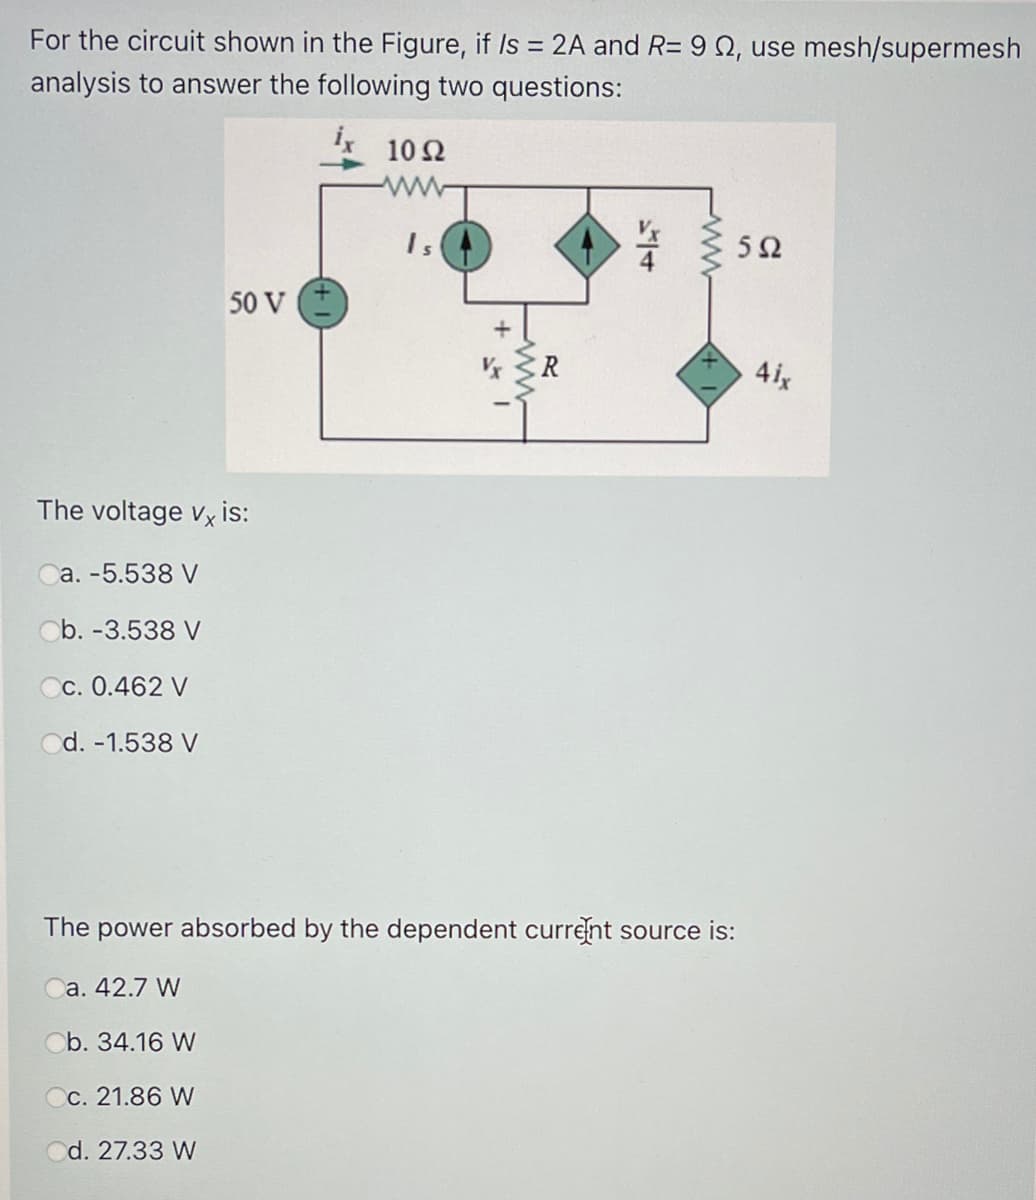 For the circuit shown in the Figure, if Is = 2A and R= 9 2, use mesh/supermesh
analysis to answer the following two questions:
10 2
ww
Is
5Ω
50 V
4ix
The voltage vx is:
a. -5.538 V
Ob. -3.538 V
Cc. 0.462 V
Od. -1.538 V
The power absorbed by the dependent current source is:
a. 42.7 W
Ob. 34.16 W
Cc. 21.86 W
d. 27.33 W
/4
